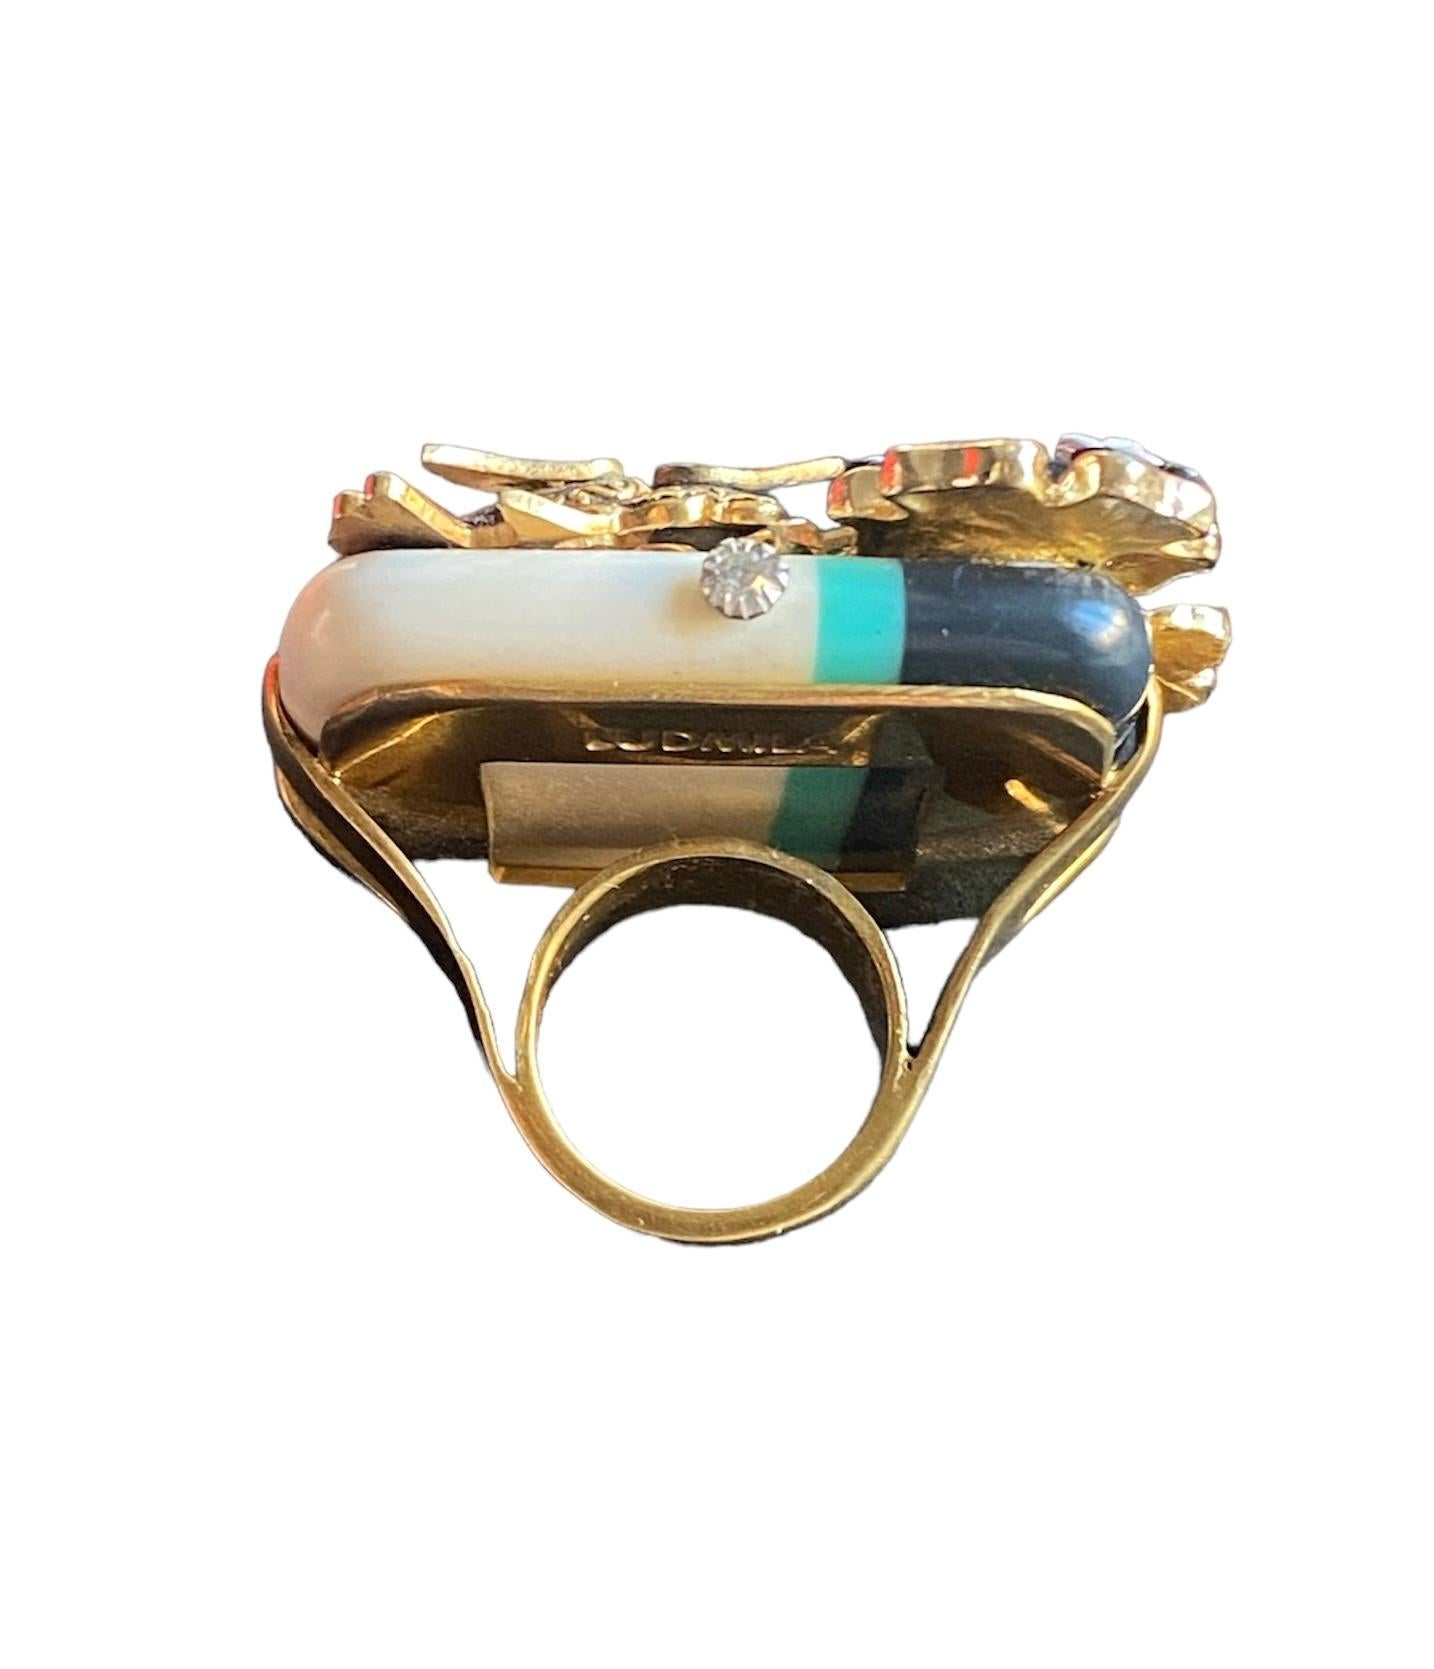 Women's One Off Ring. High Upcycling. Resin, Gold Plated Bronze & Vintage Elements. For Sale